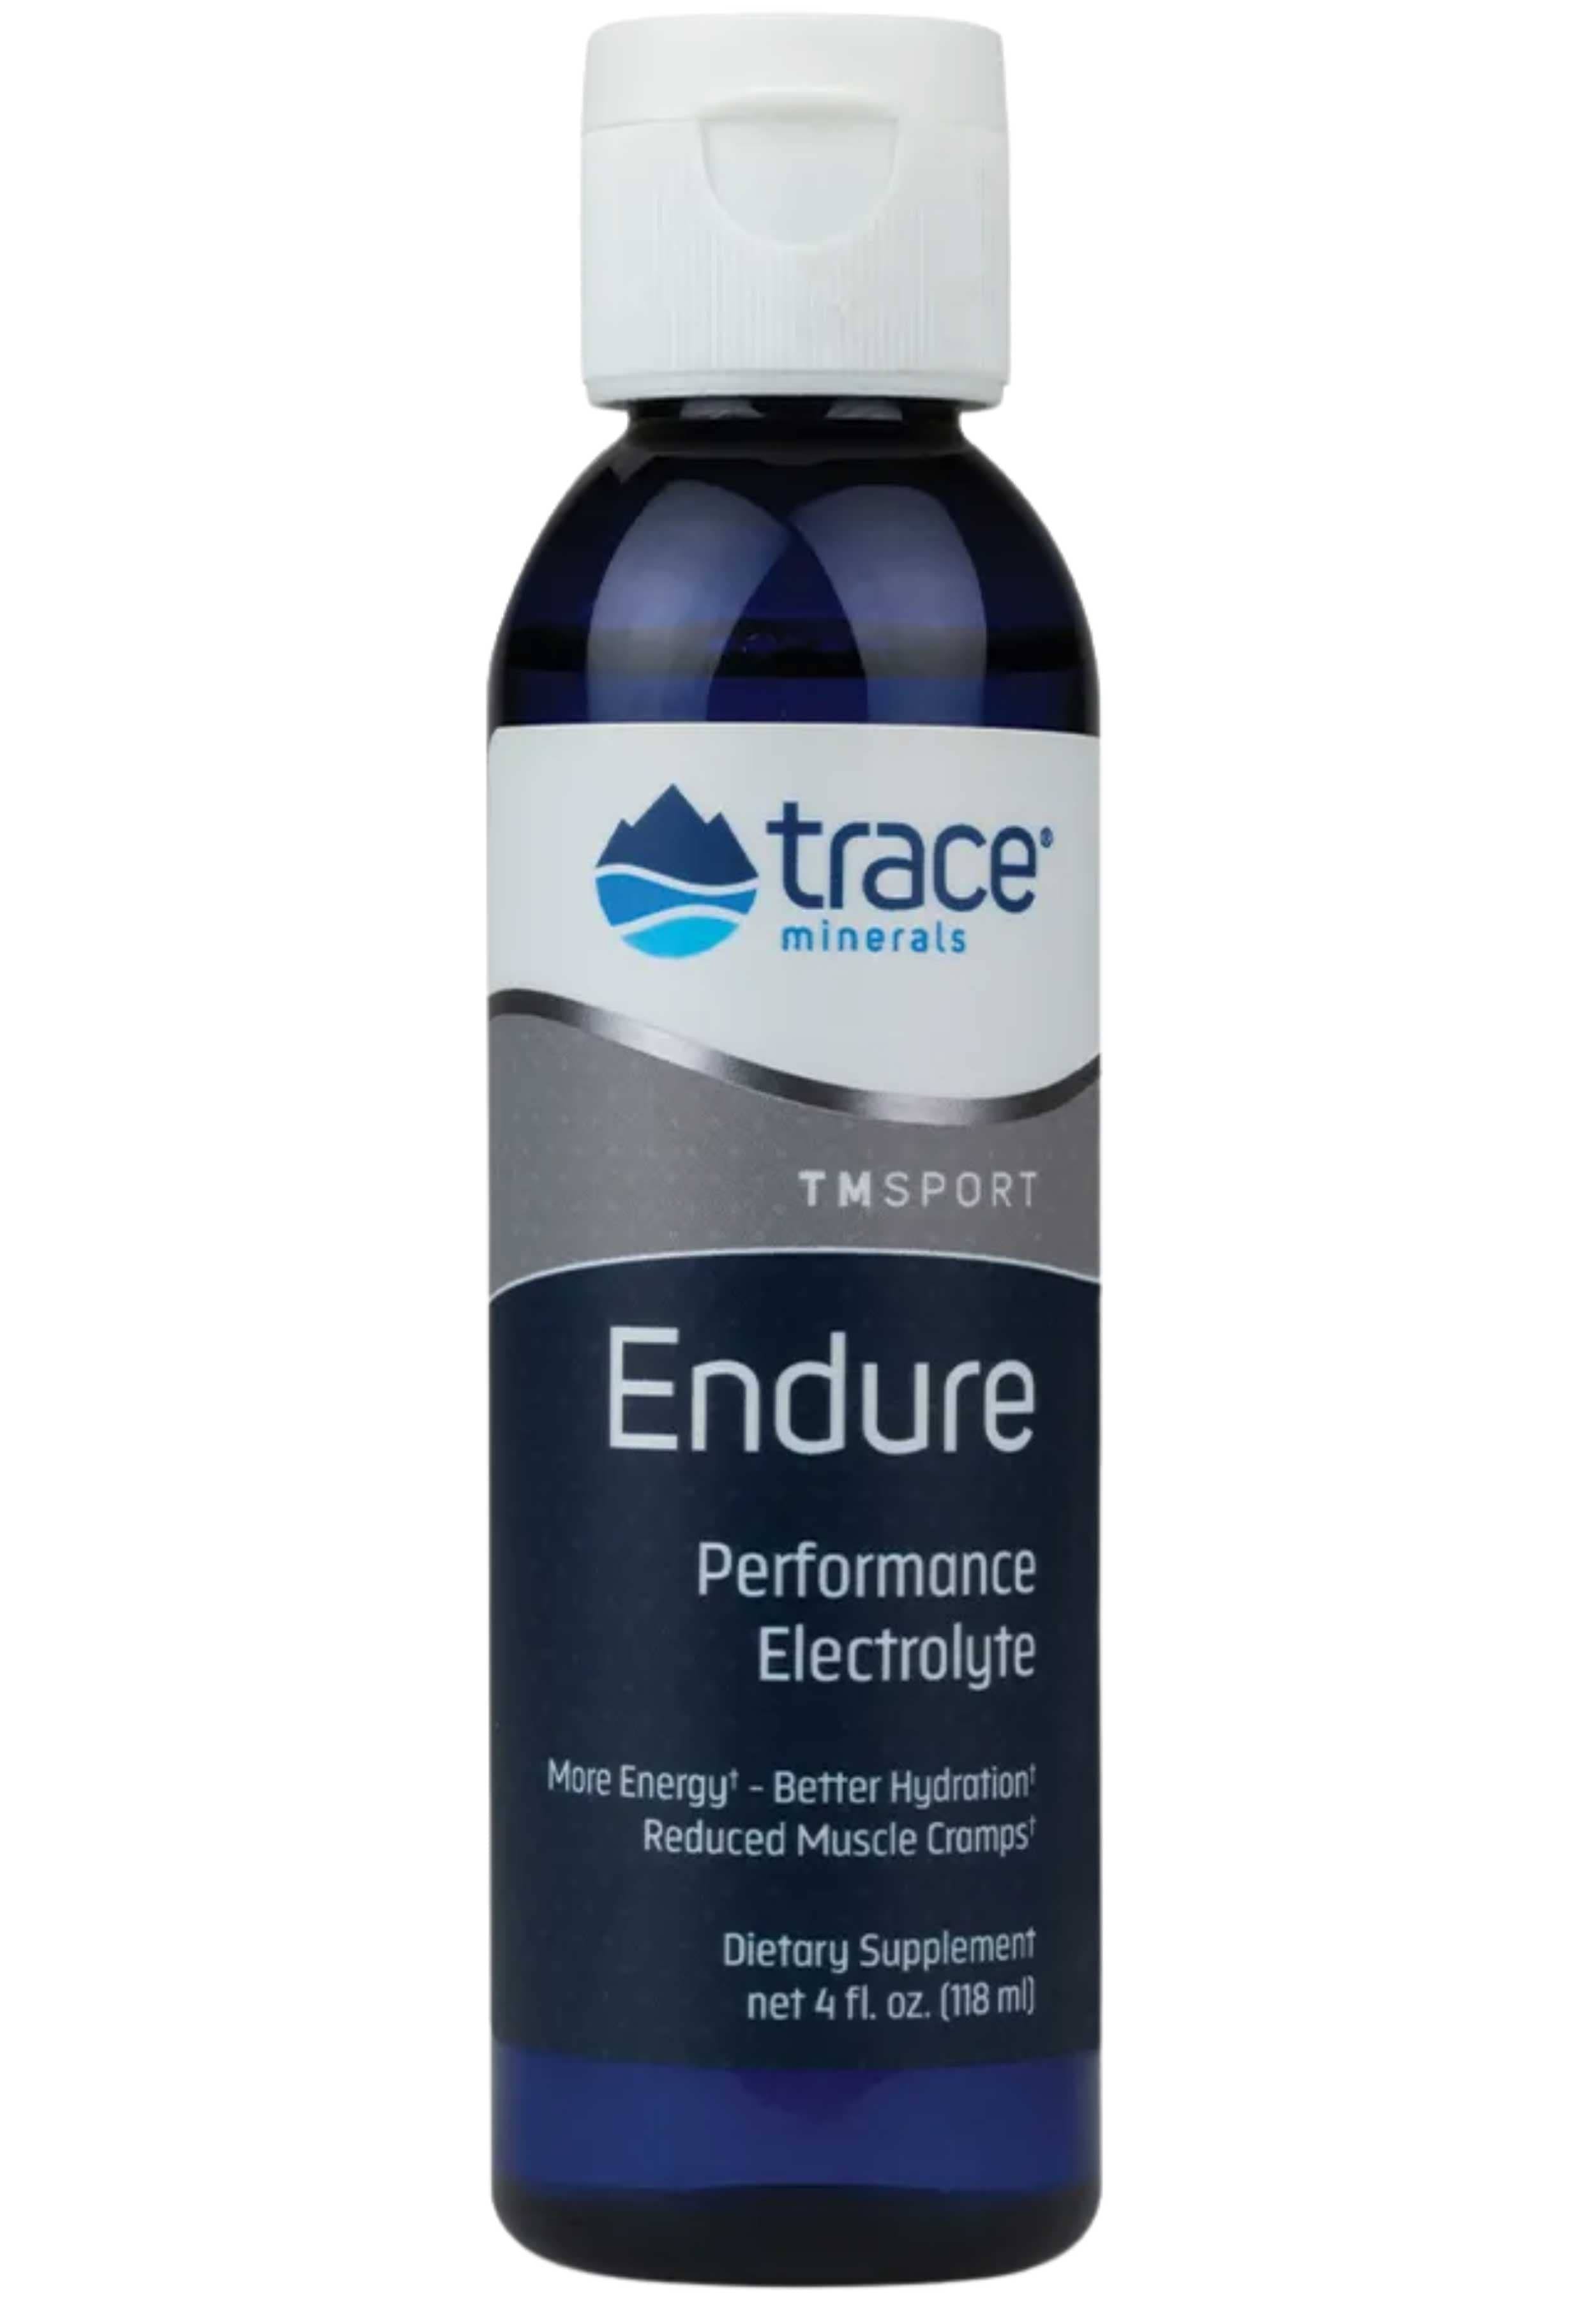 Trace Minerals Research Endure Performance Electrolyte Energy Supplement - 4oz